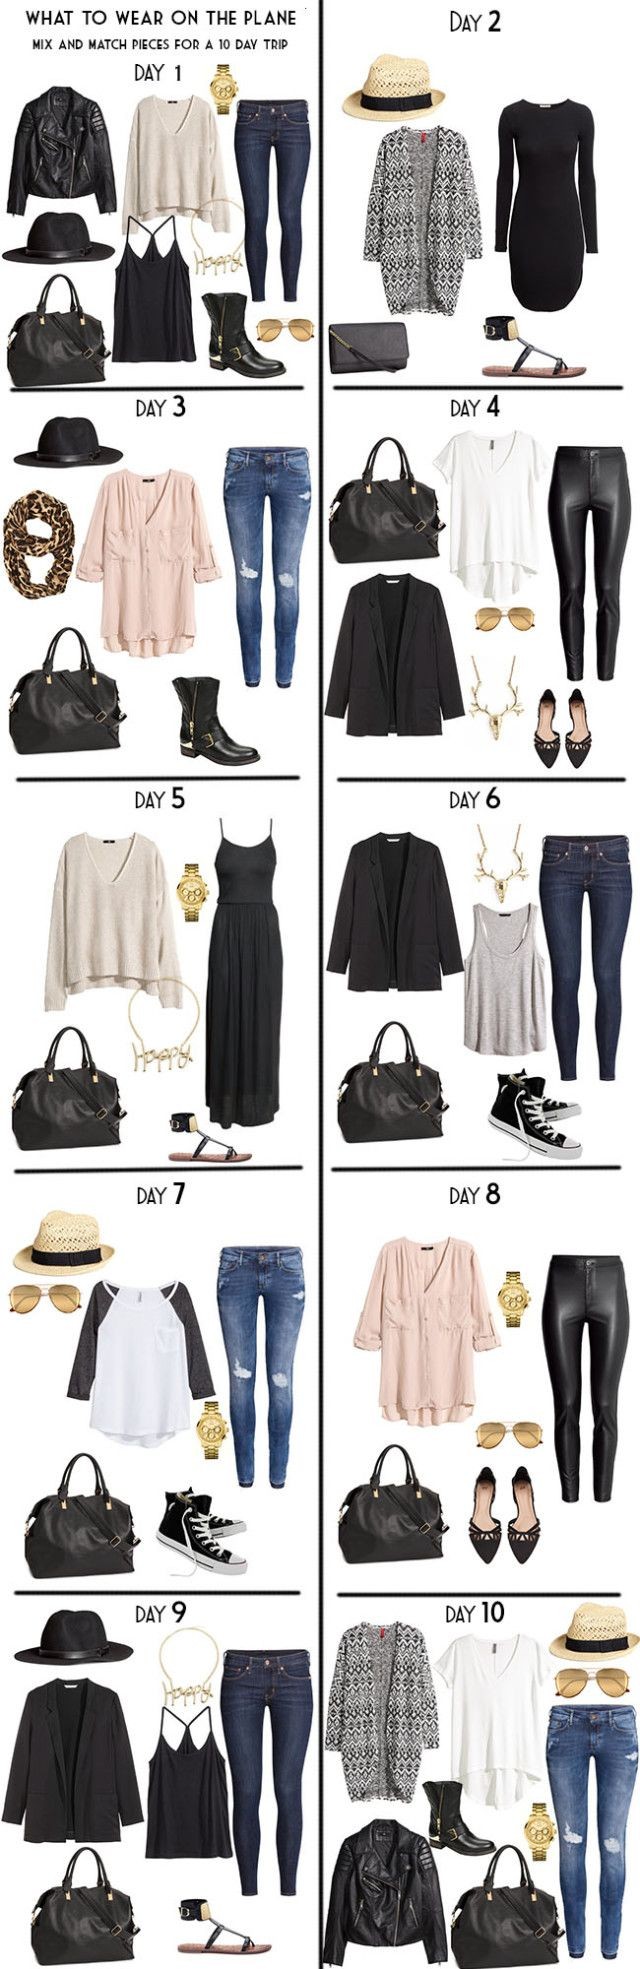 10 Day Packing List 20 pieces in a carry-on for Da...